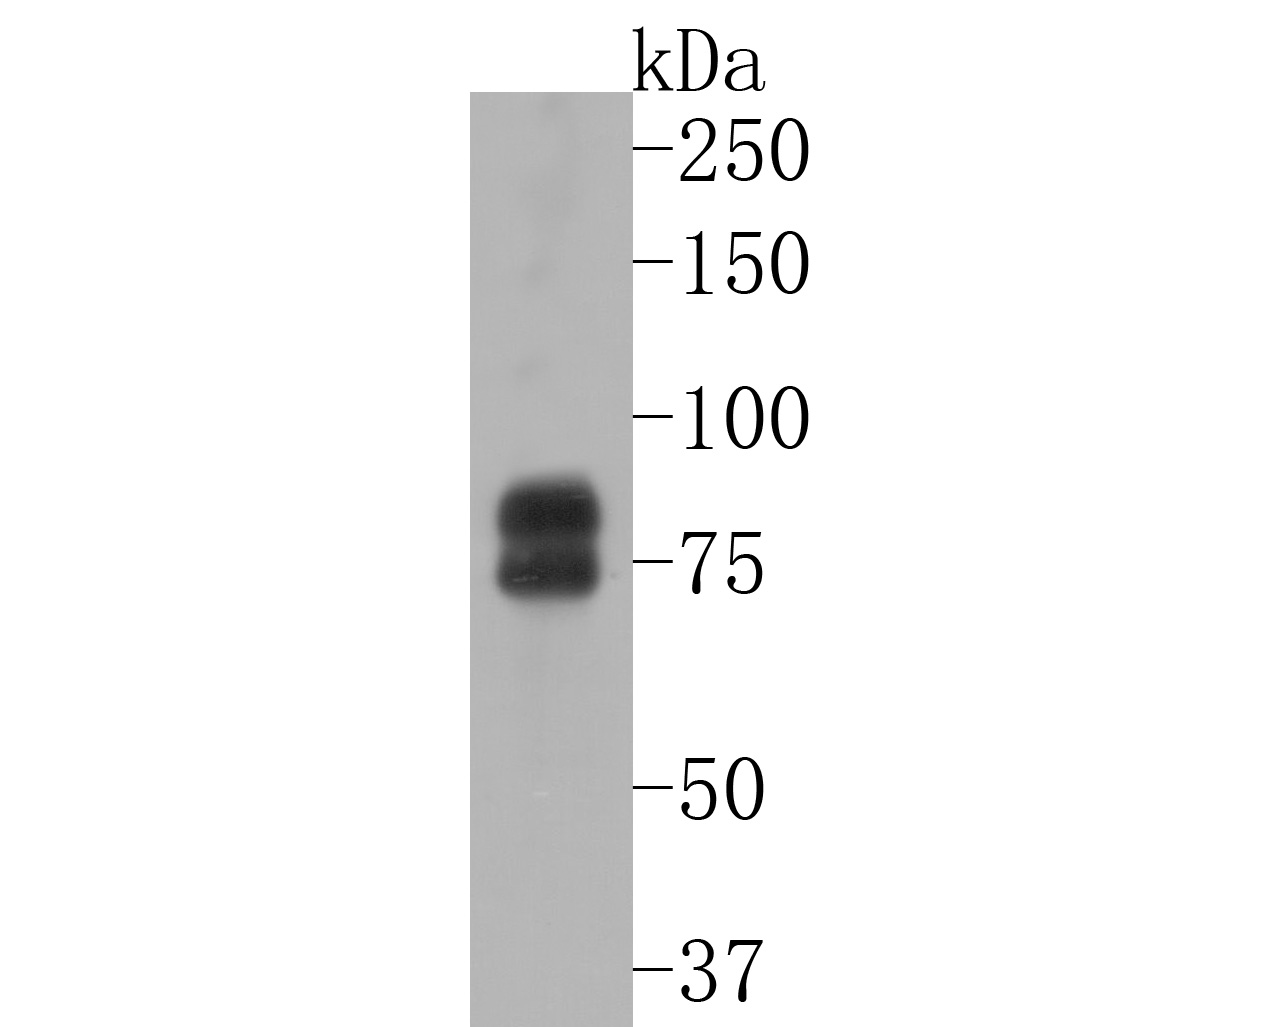 Western blot analysis of FMRP on Daudi cell lysates. Proteins were transferred to a PVDF membrane and blocked with 5% BSA in PBS for 1 hour at room temperature. The primary antibody (ET1703-70, 1/500) was used in 5% BSA at room temperature for 2 hours. Goat Anti-Rabbit IgG - HRP Secondary Antibody (HA1001) at 1:5,000 dilution was used for 1 hour at room temperature.